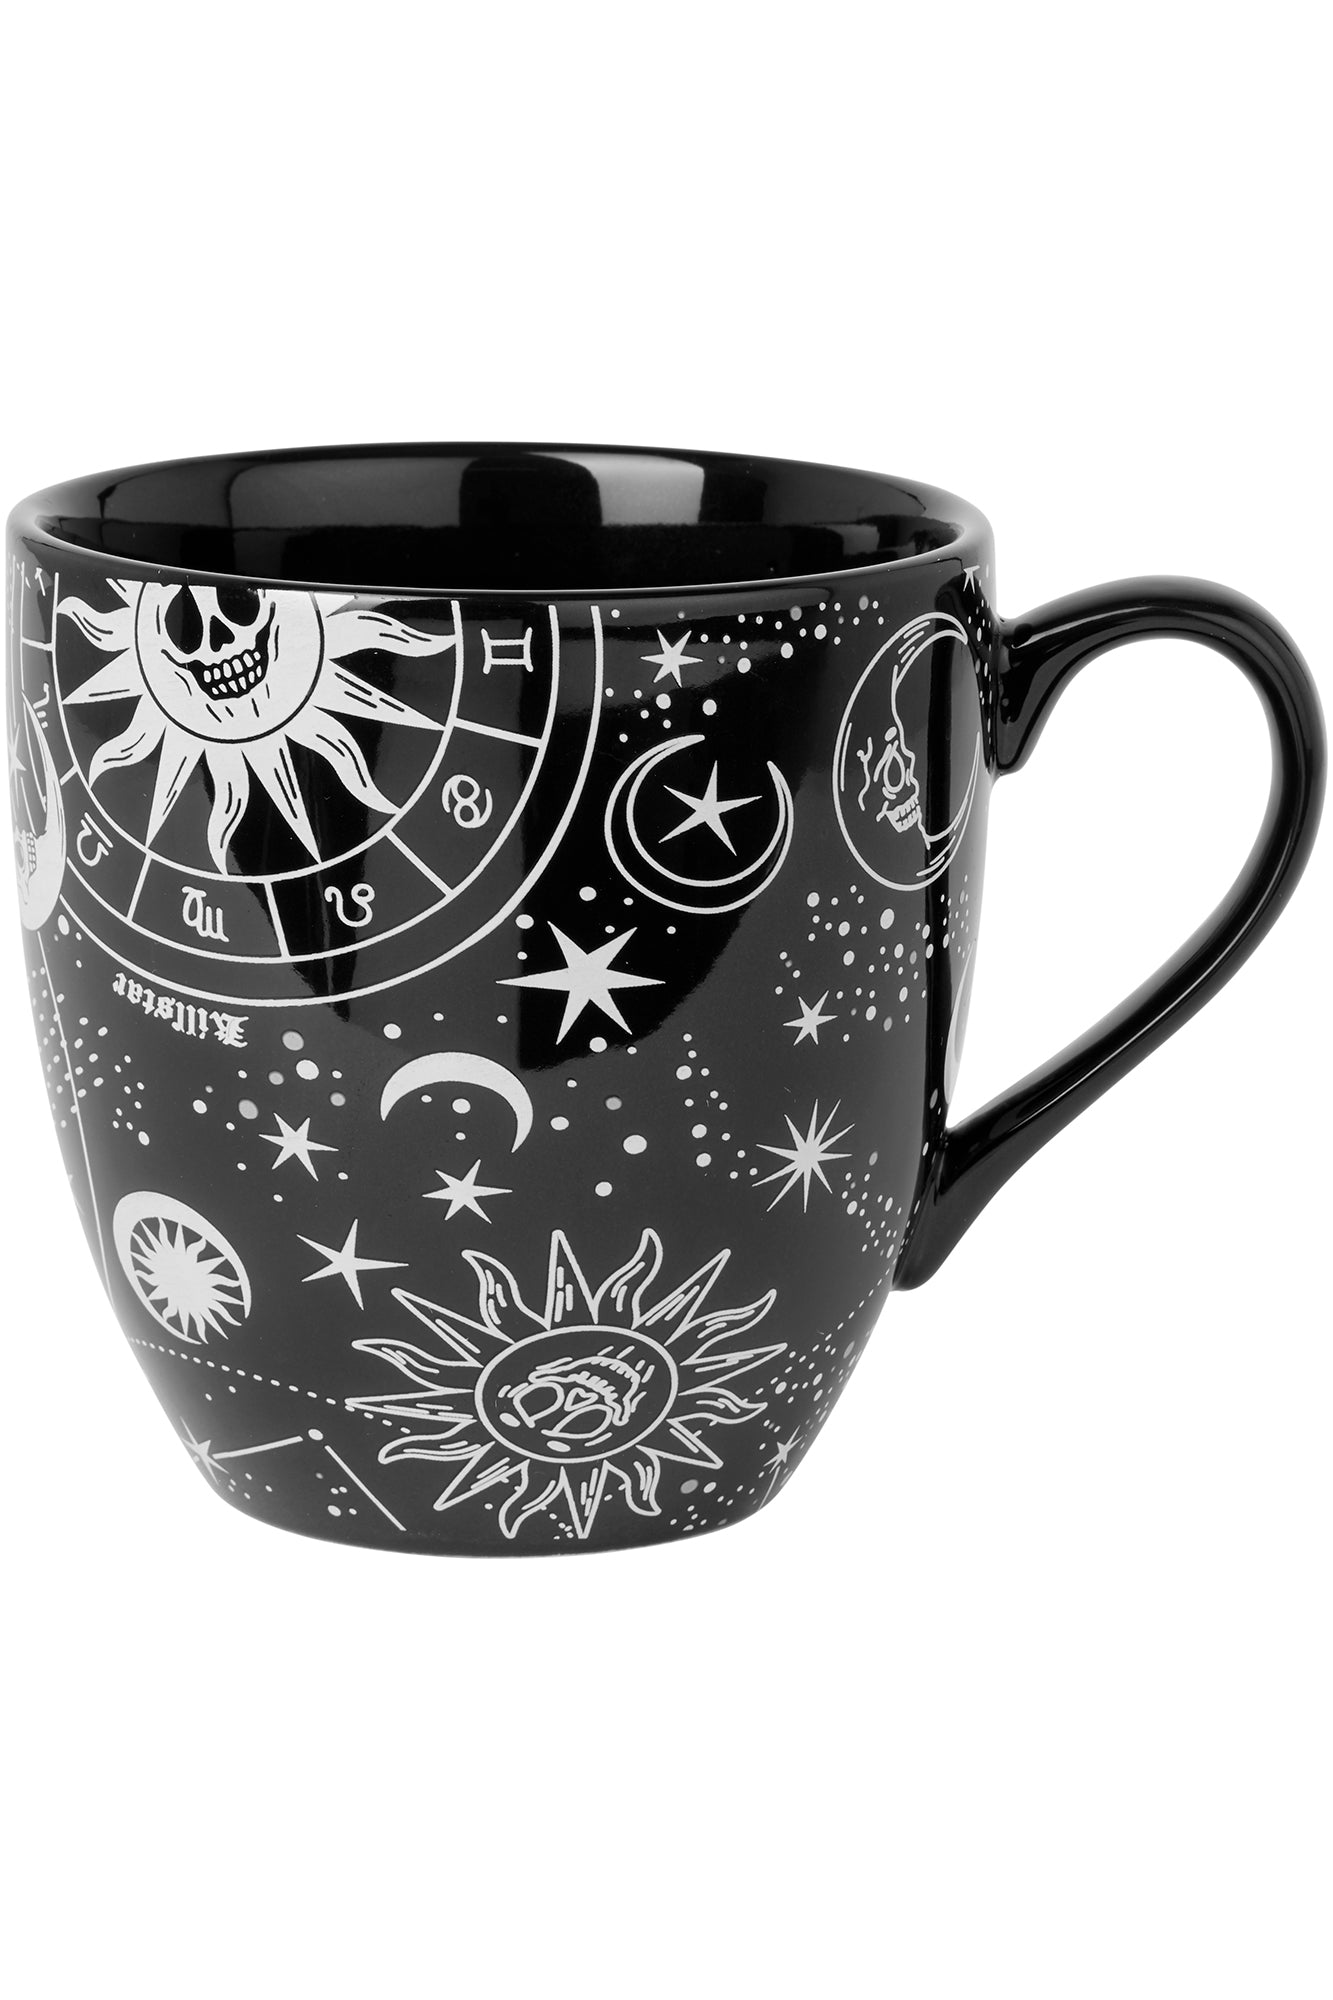 Horoscope Moon and Sun Tumbler, Gothic Coffee Travel Mug, Moon Coffee Mug,  Witchy Gifts for Women, Gothic Gifts, Witch Stuff, Halloween Decor, Goth